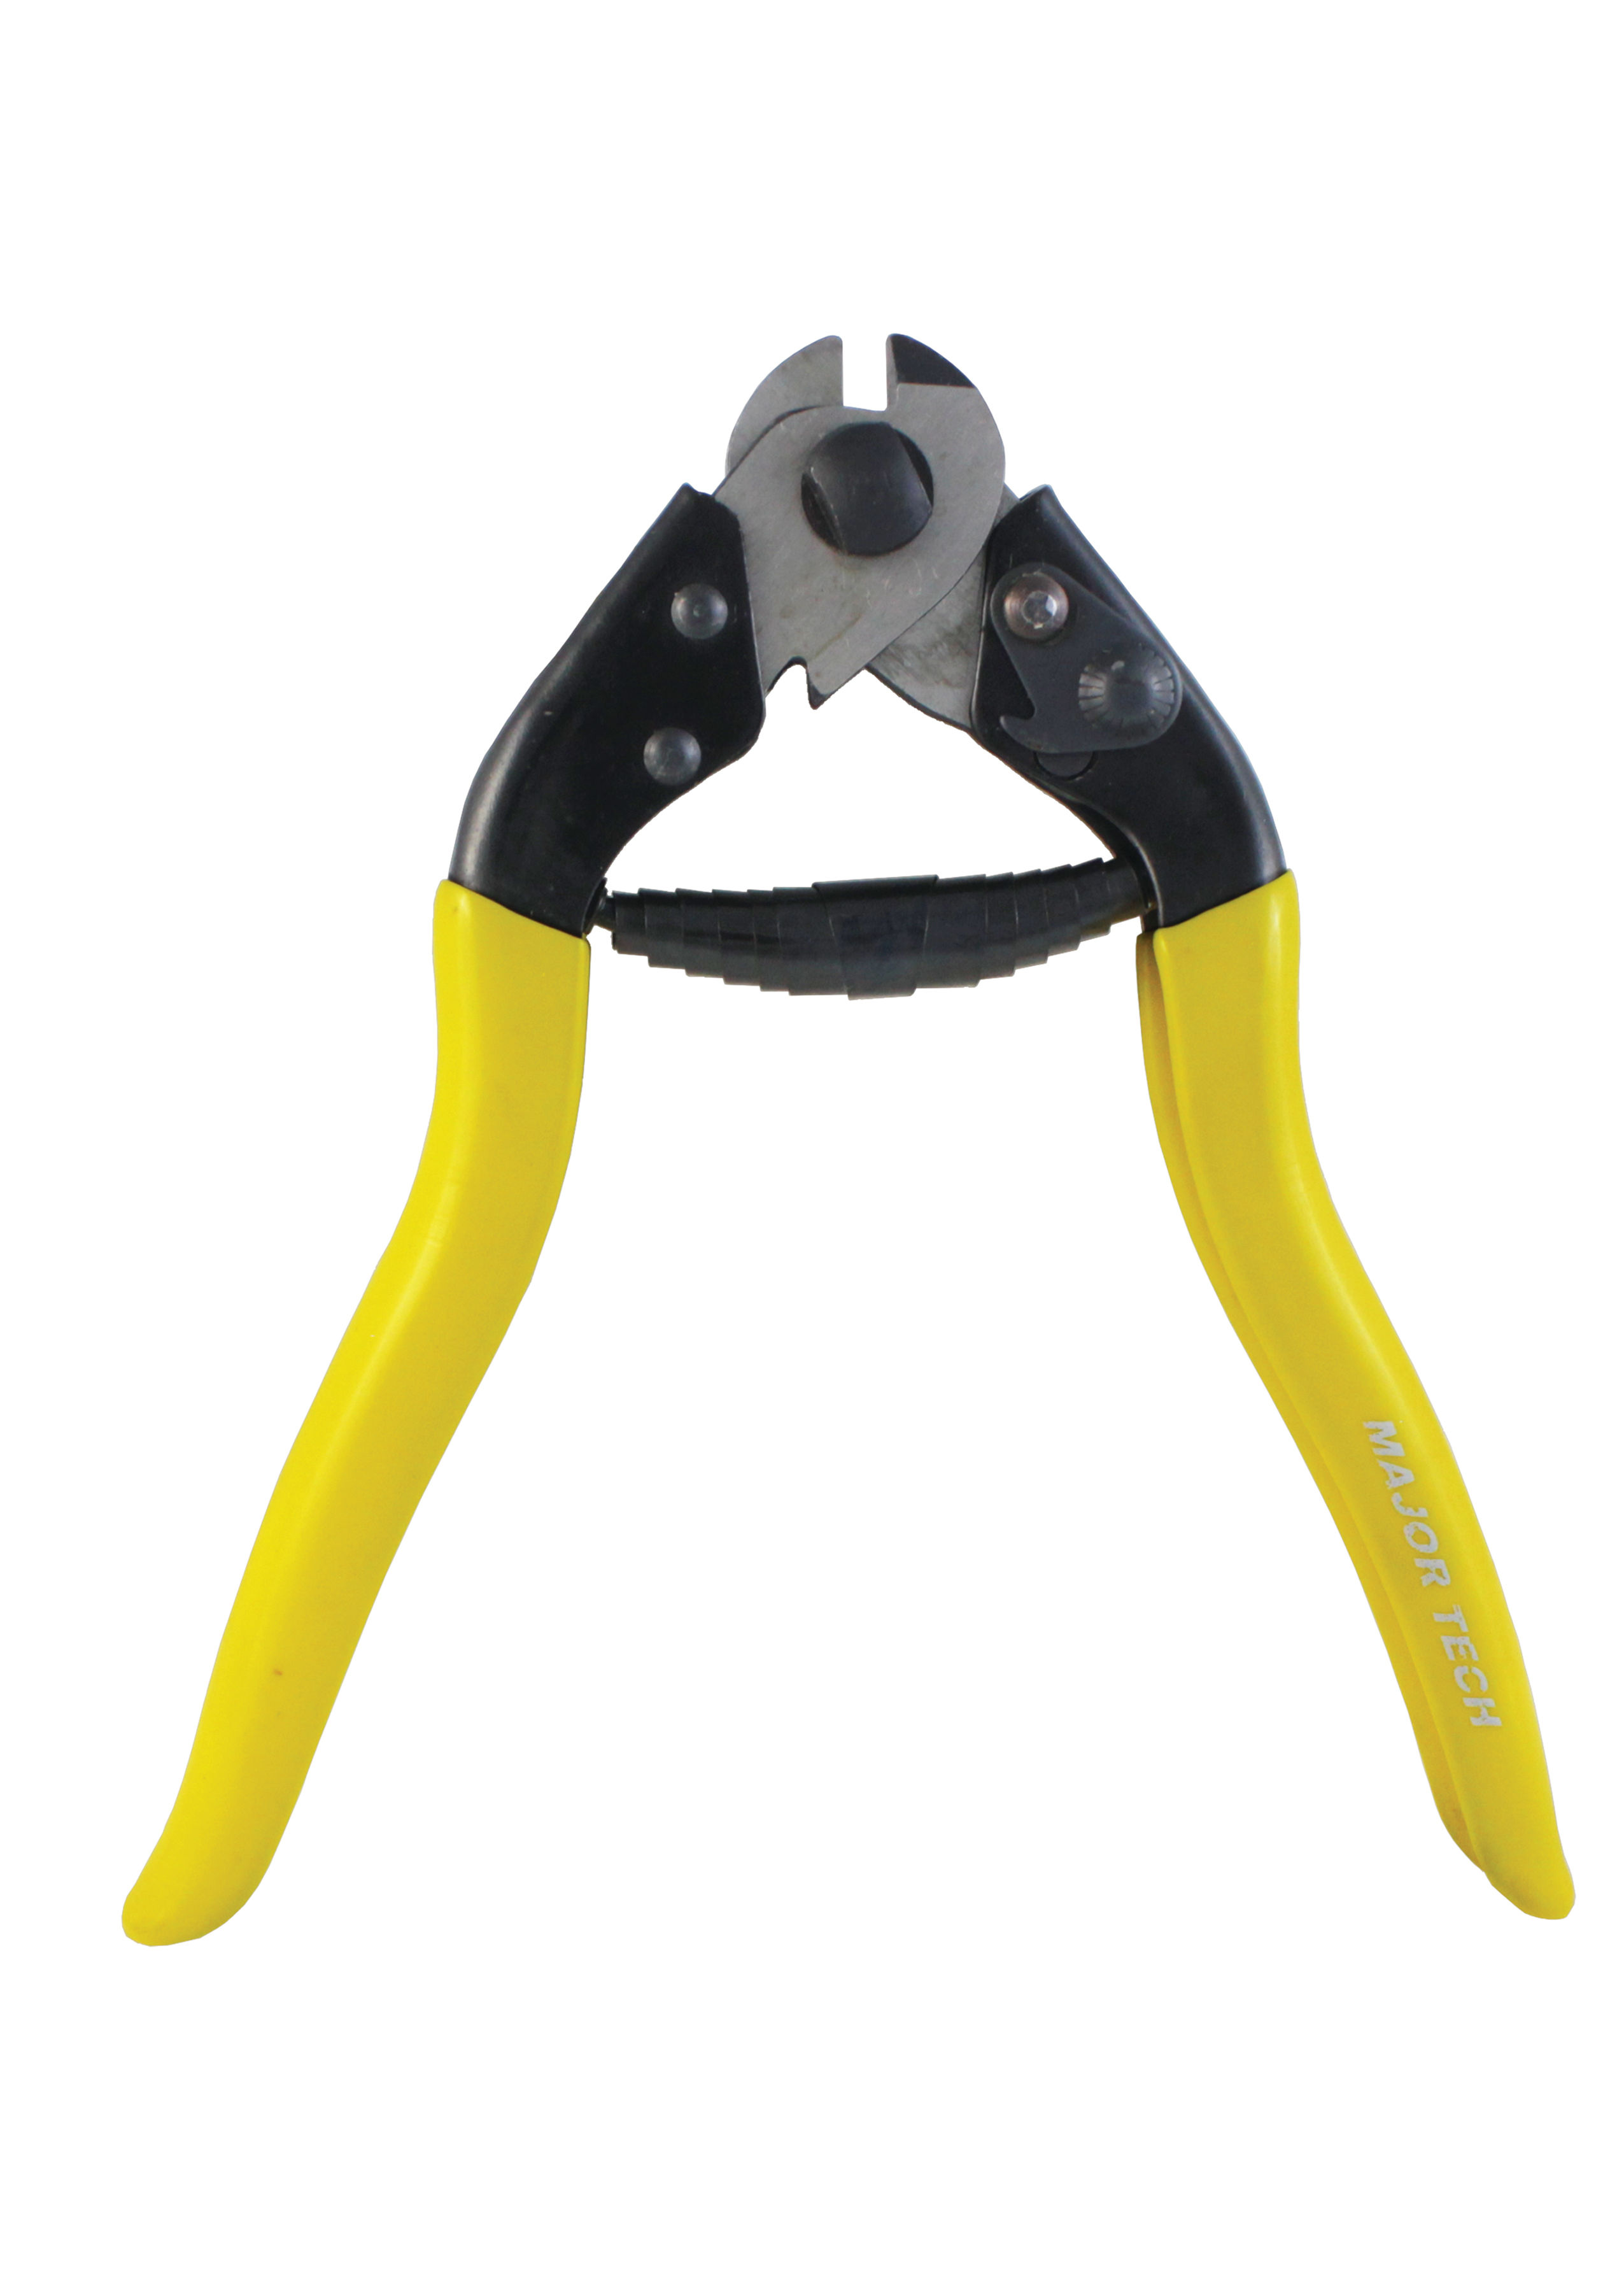 20mm² Wire Rope Cutter (CWR01) - Major Tech